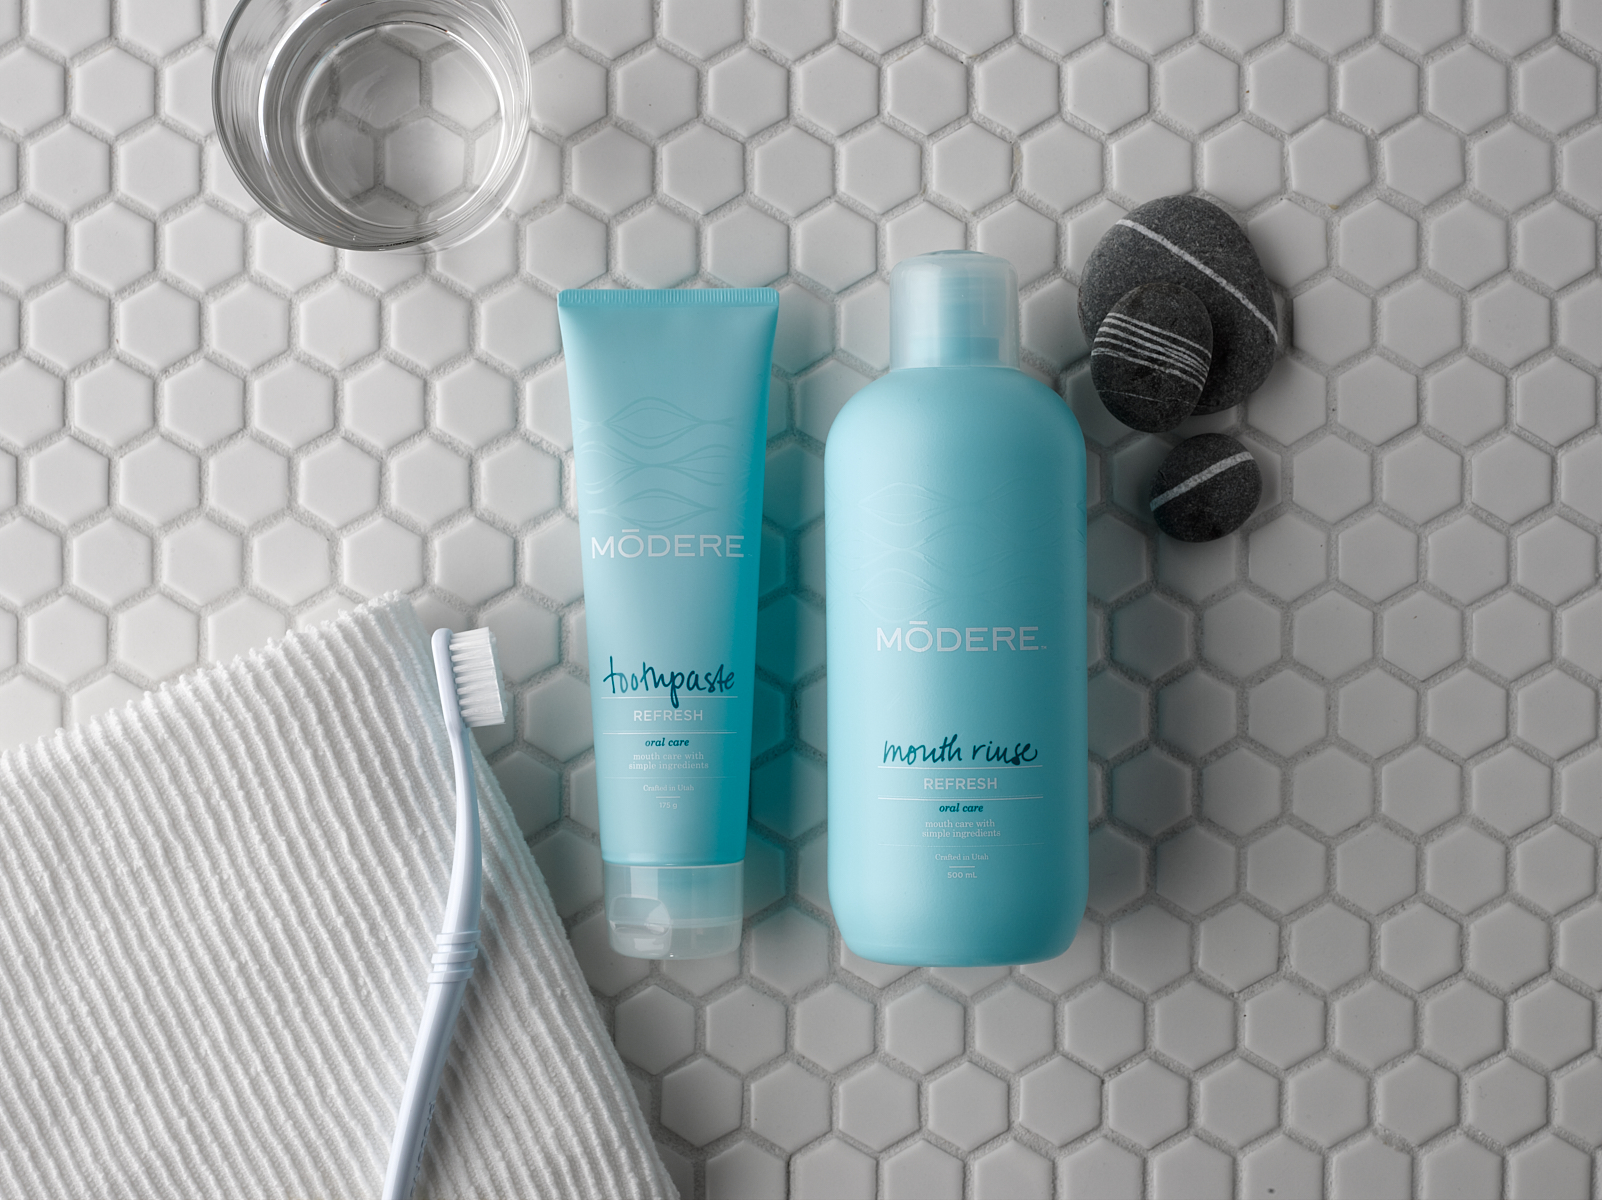 Modere mouth care products with bathroom items on counter 